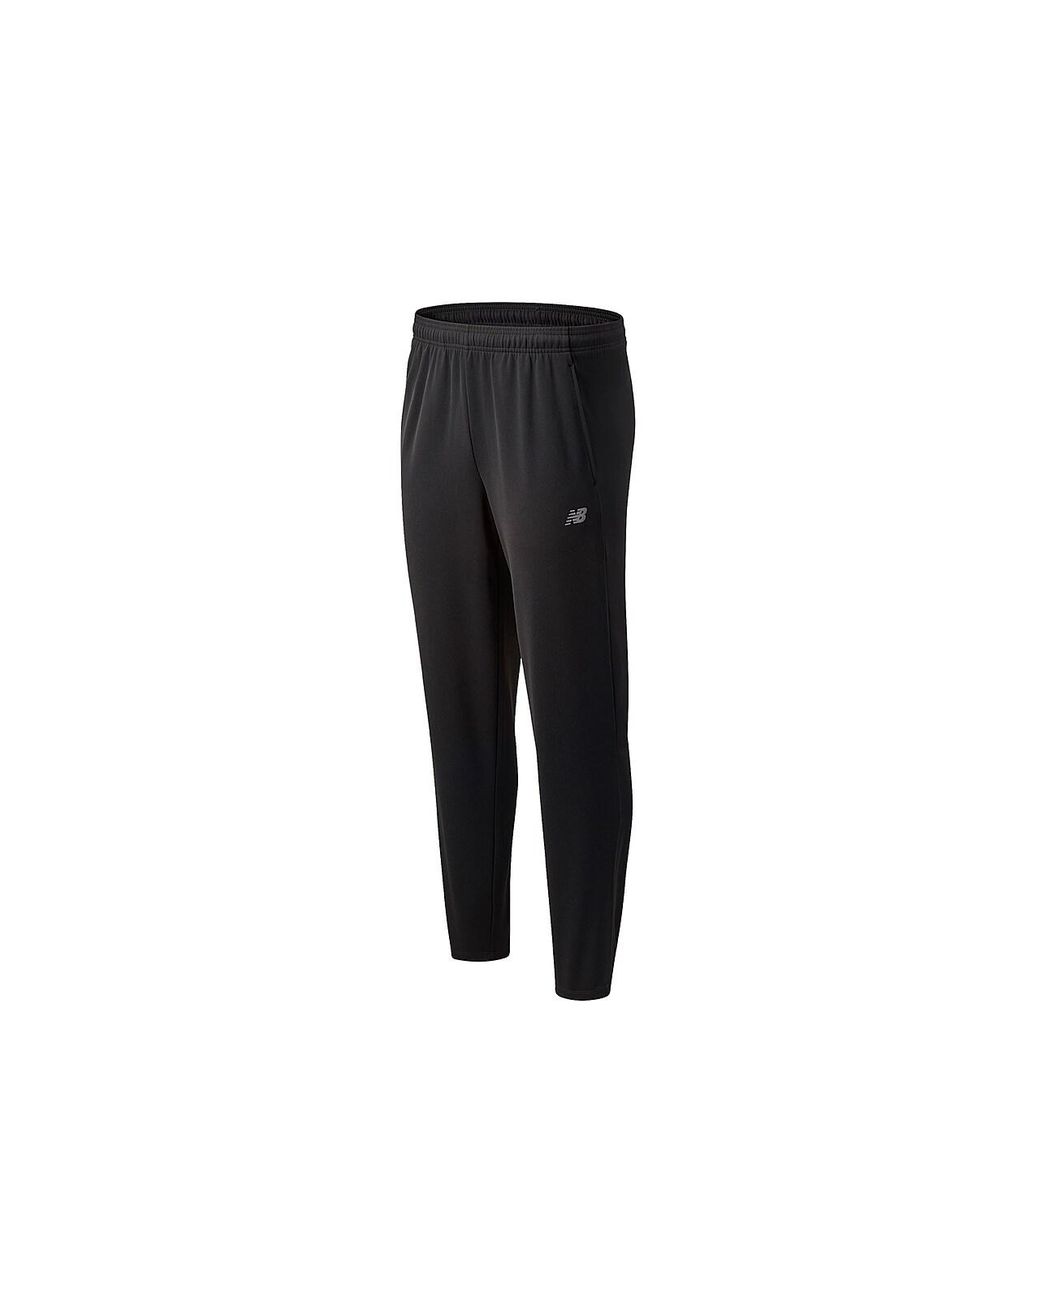 New Balance Core Knit Pants in Black for Men